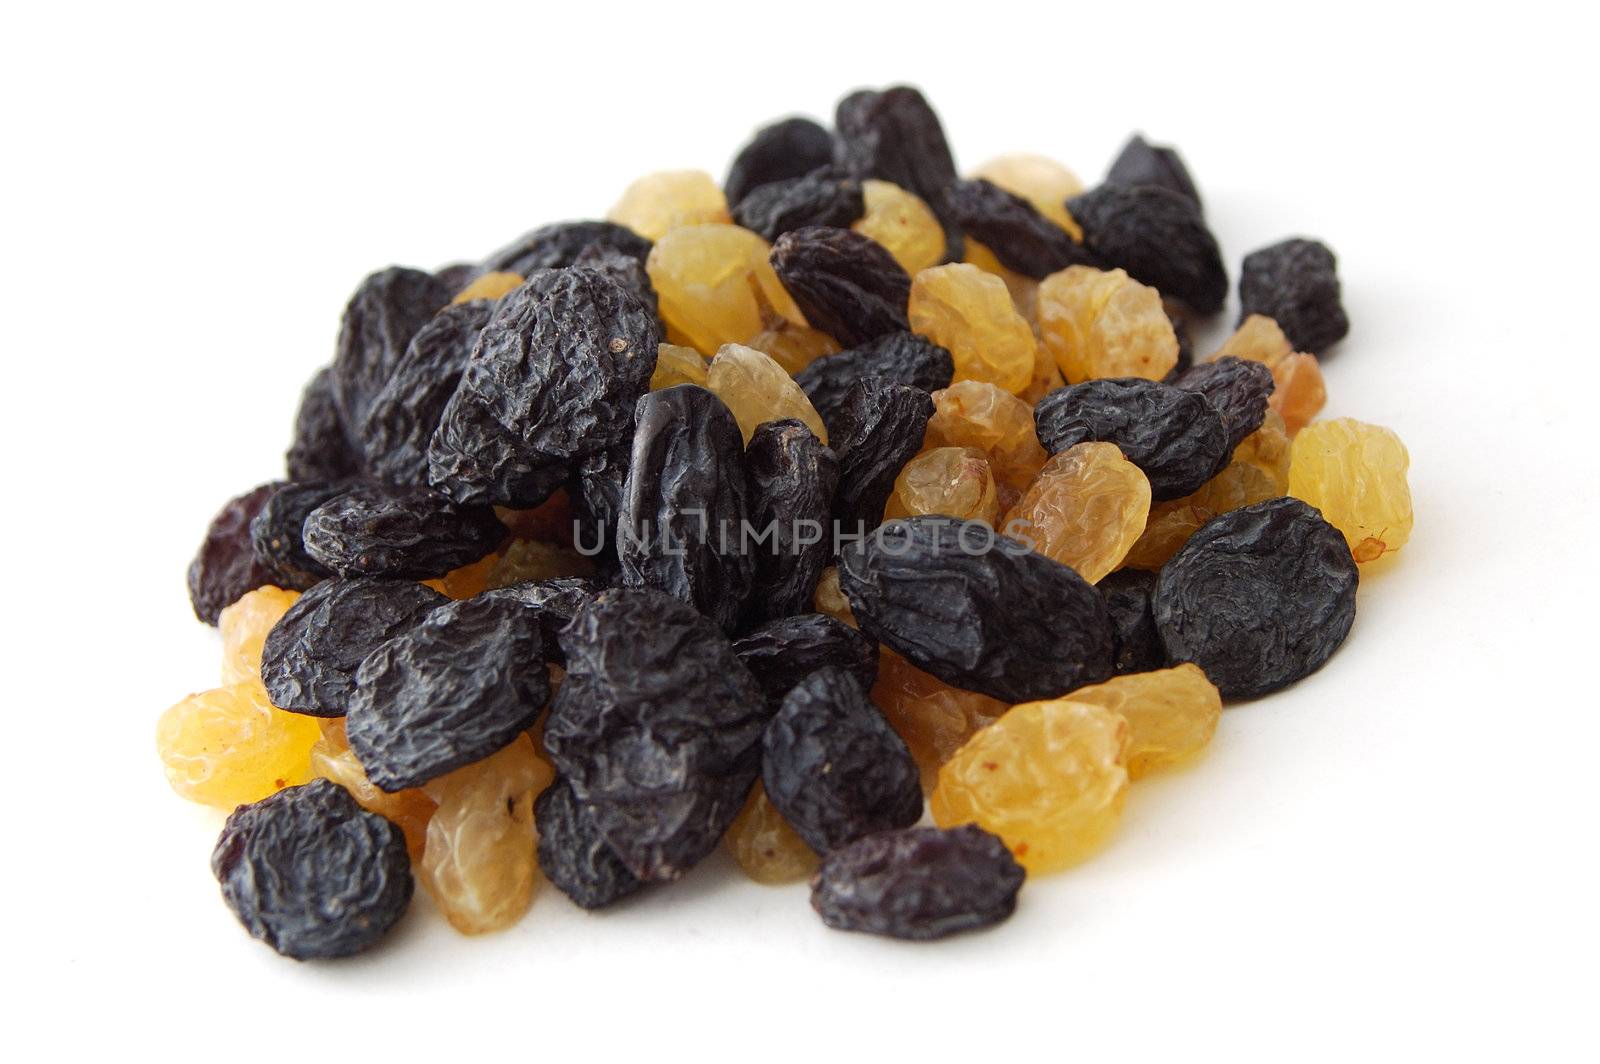 Black and yellow dry raisins. by pmaks